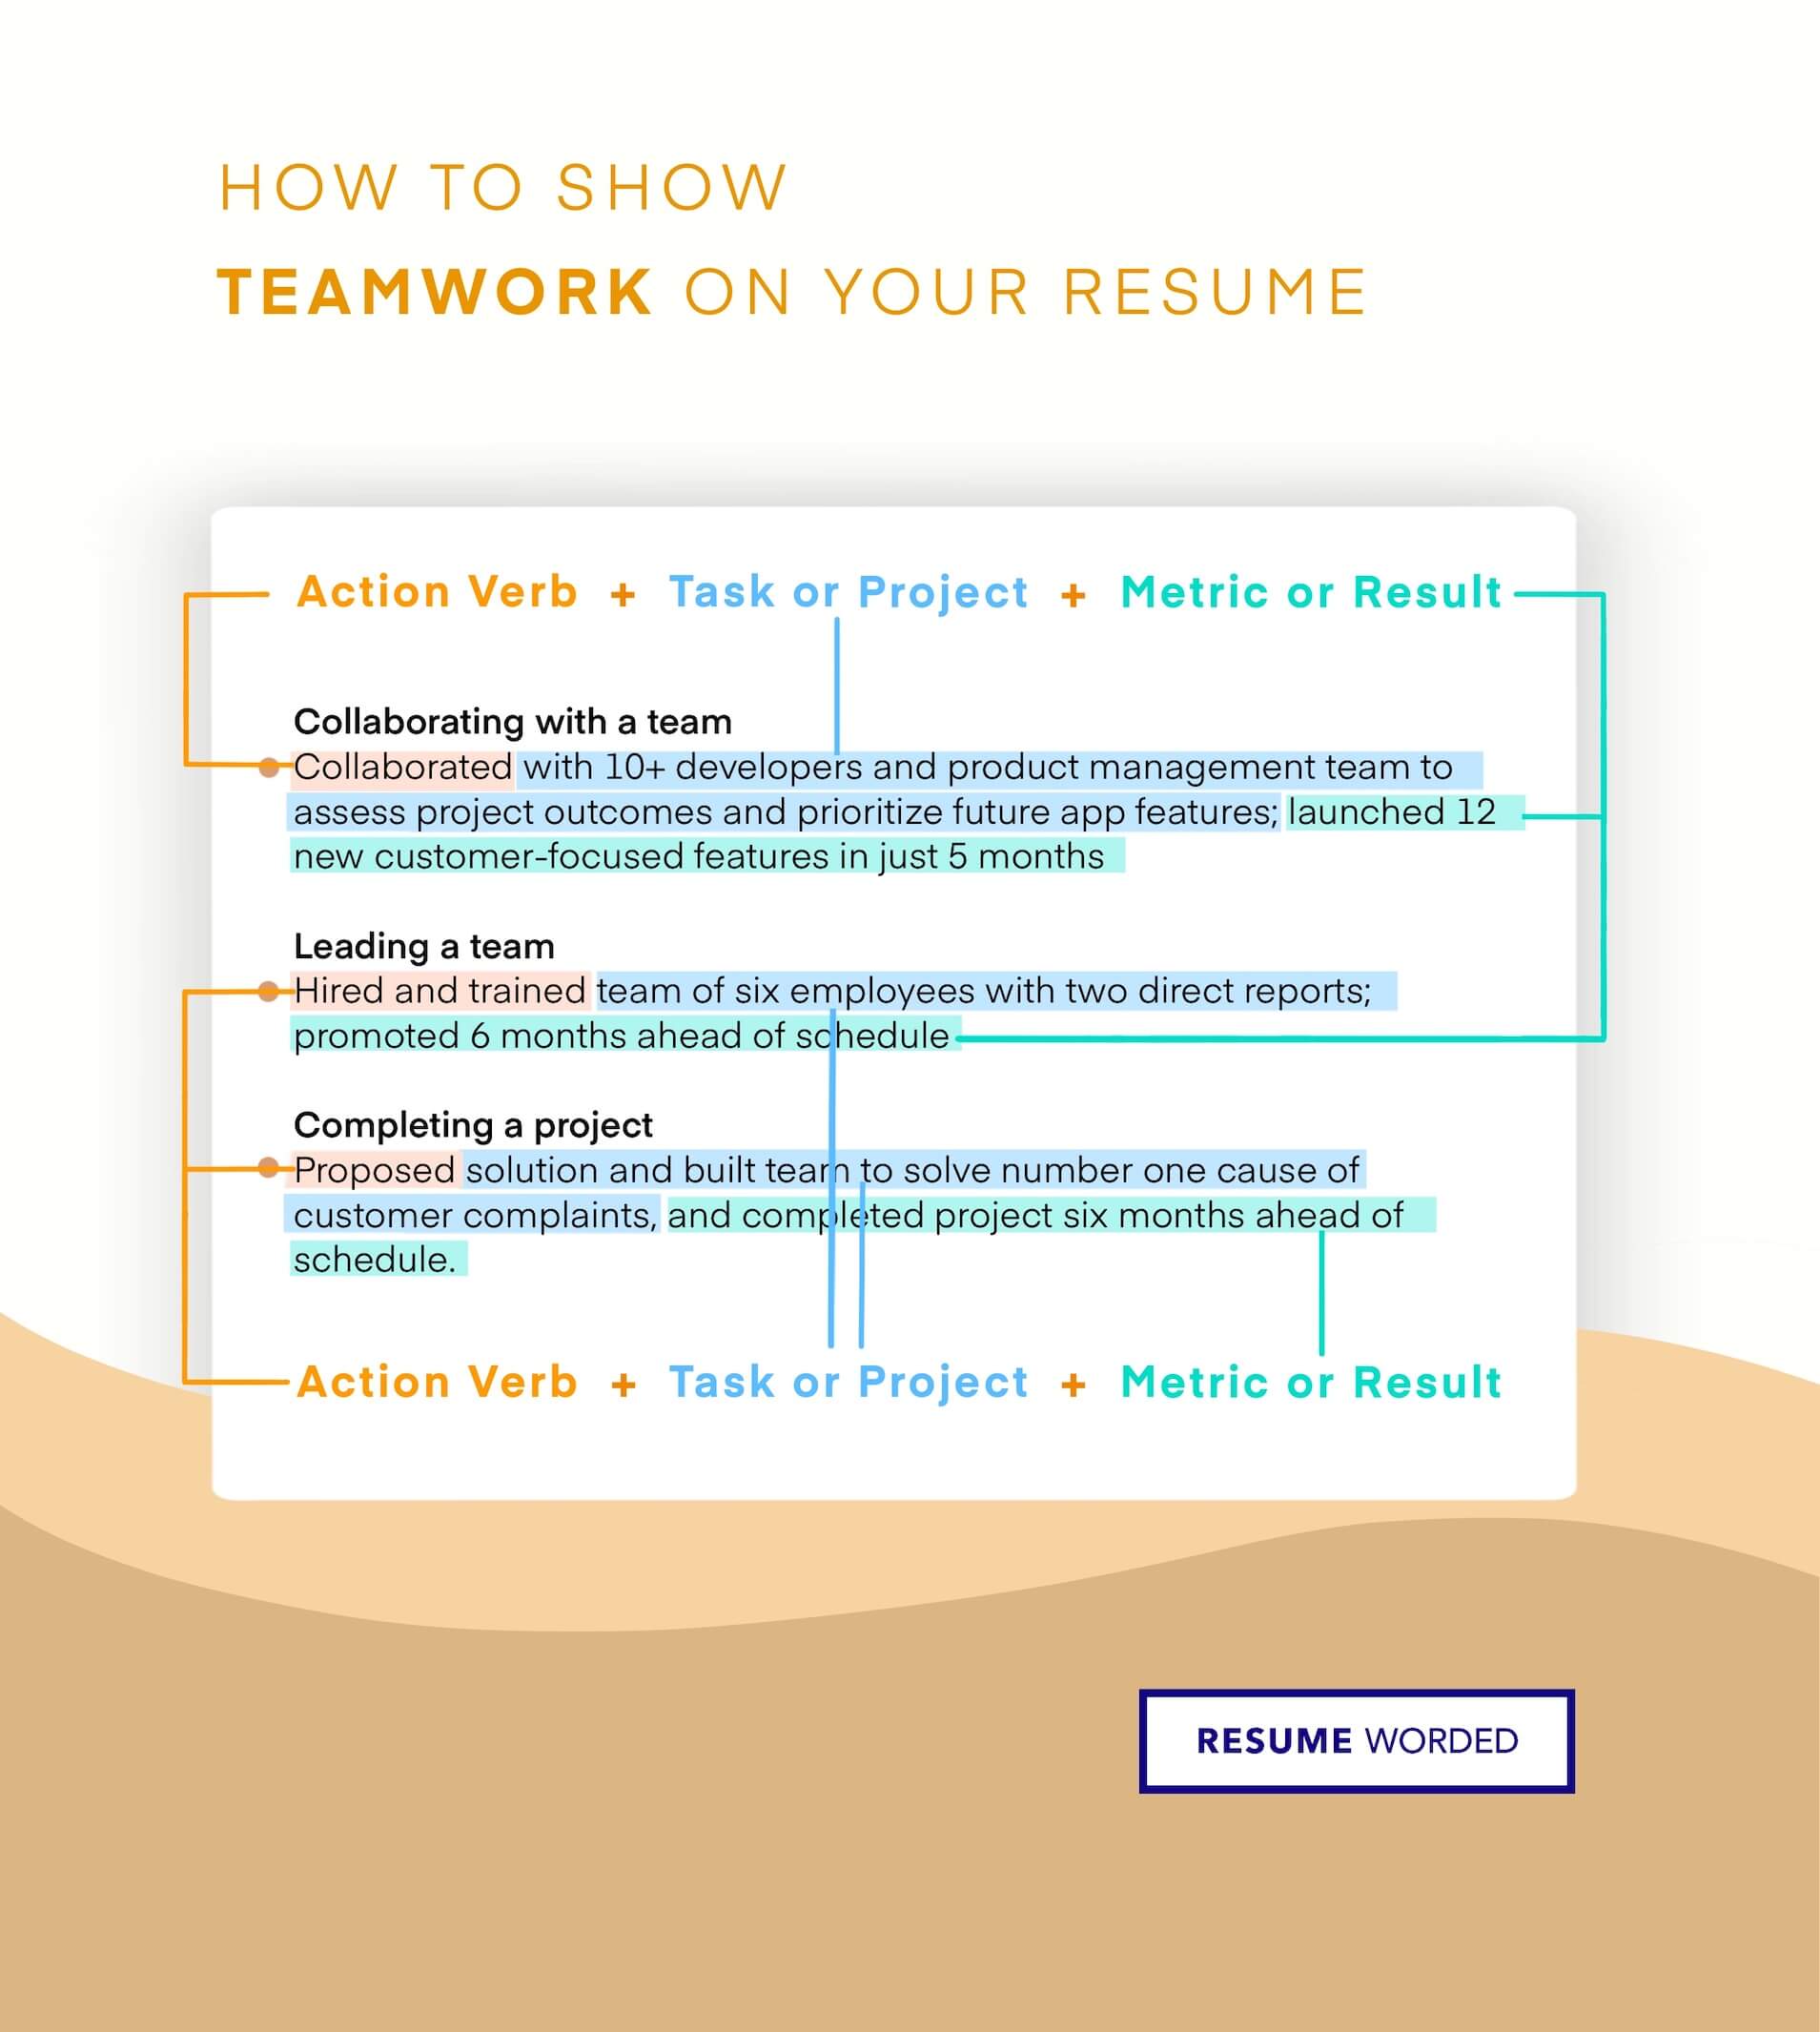 Showcase your ability to manage a team. - Special Projects Manager Resume